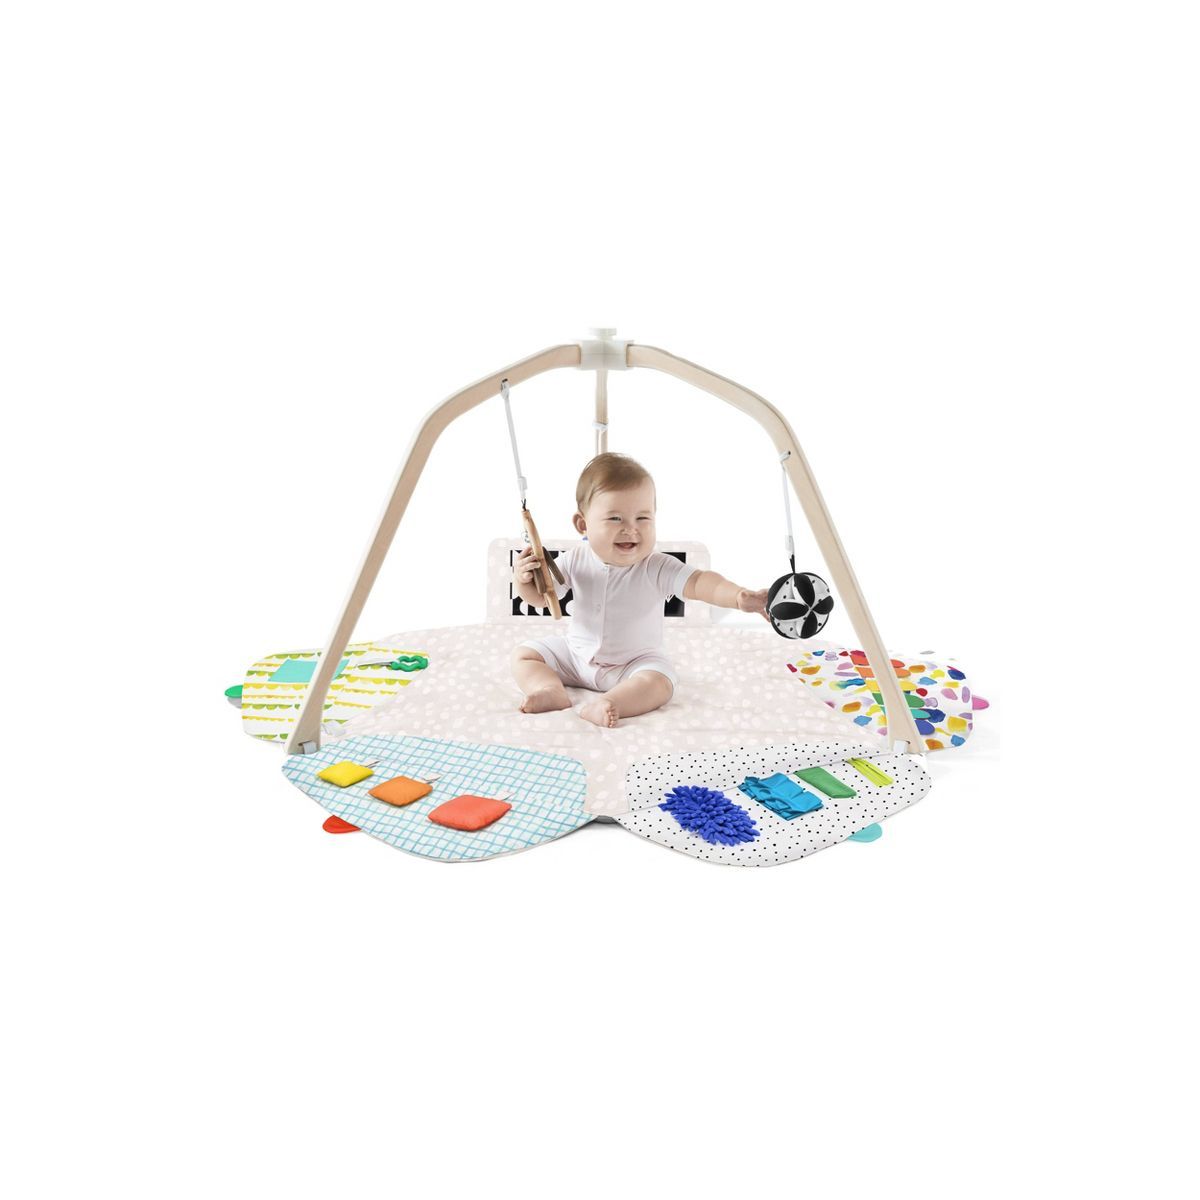 Lovevery The Play Gym | Target